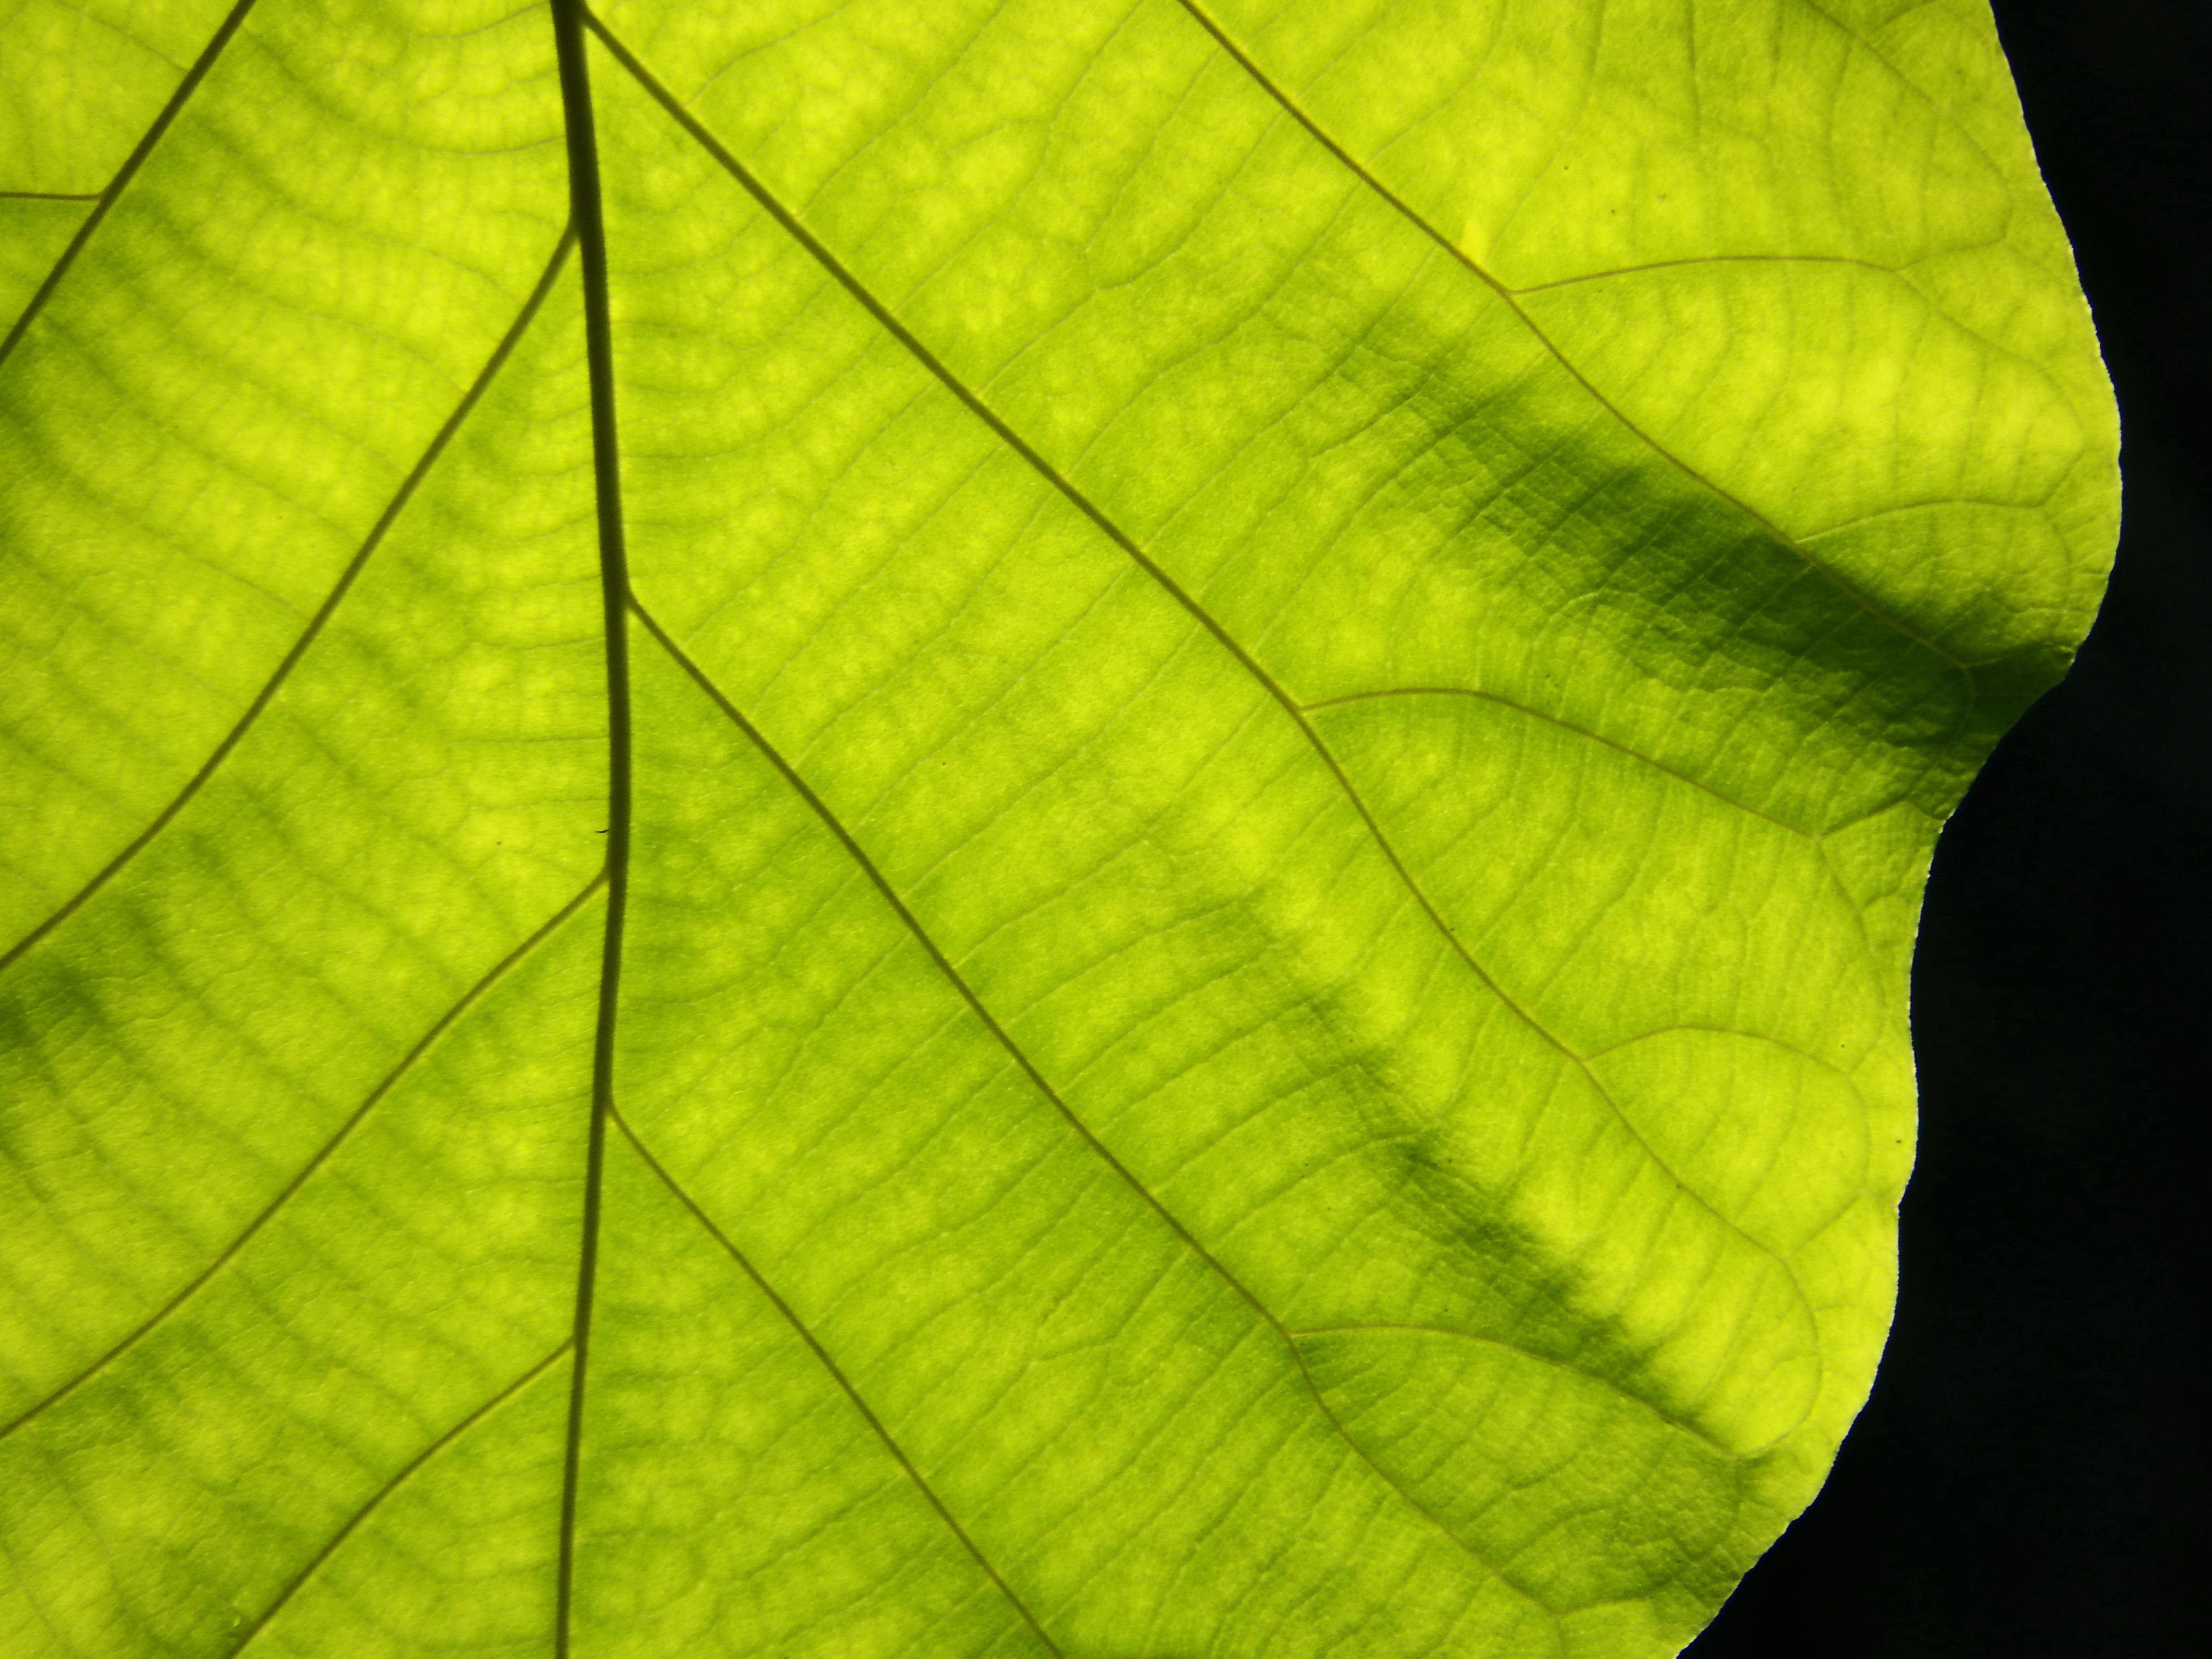 Texture of a green leaf as background photo